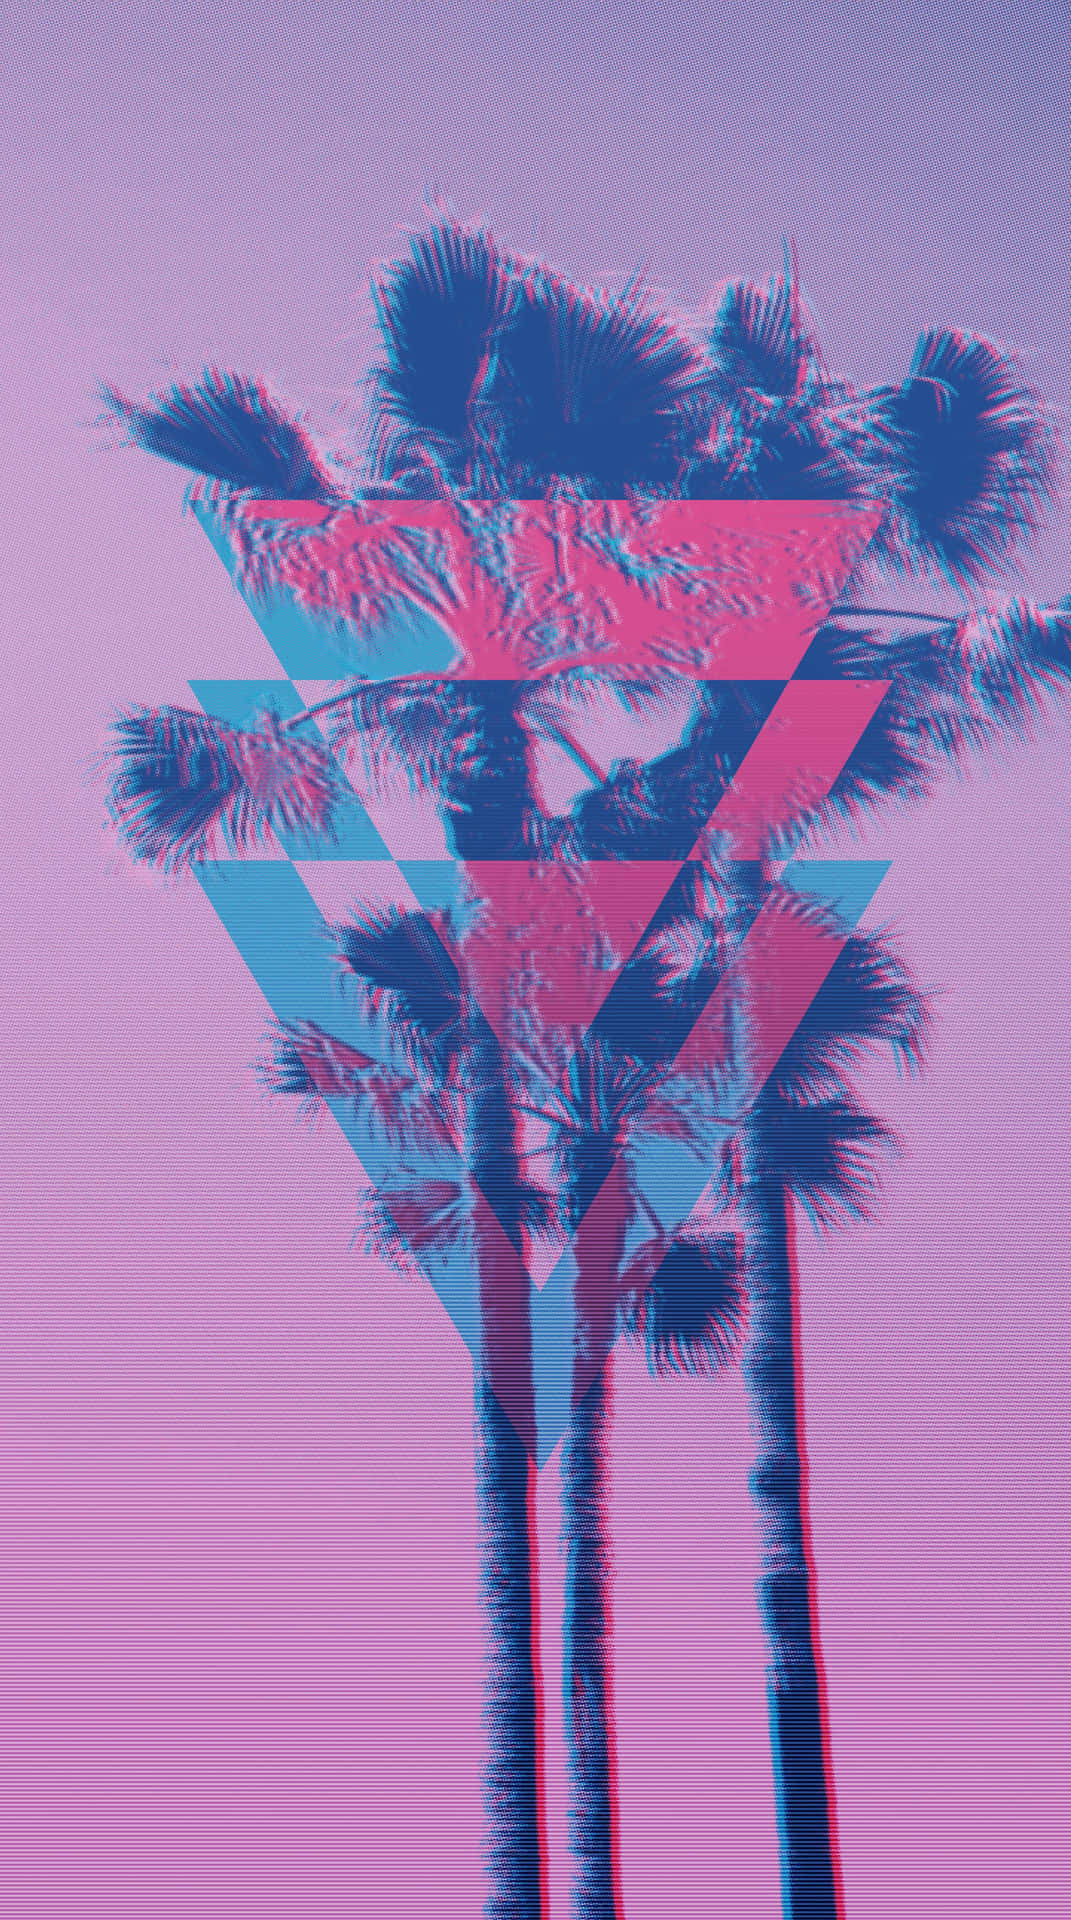 "Immerse yourself in an atmosphere of Aesthetic Vaporwave." Wallpaper